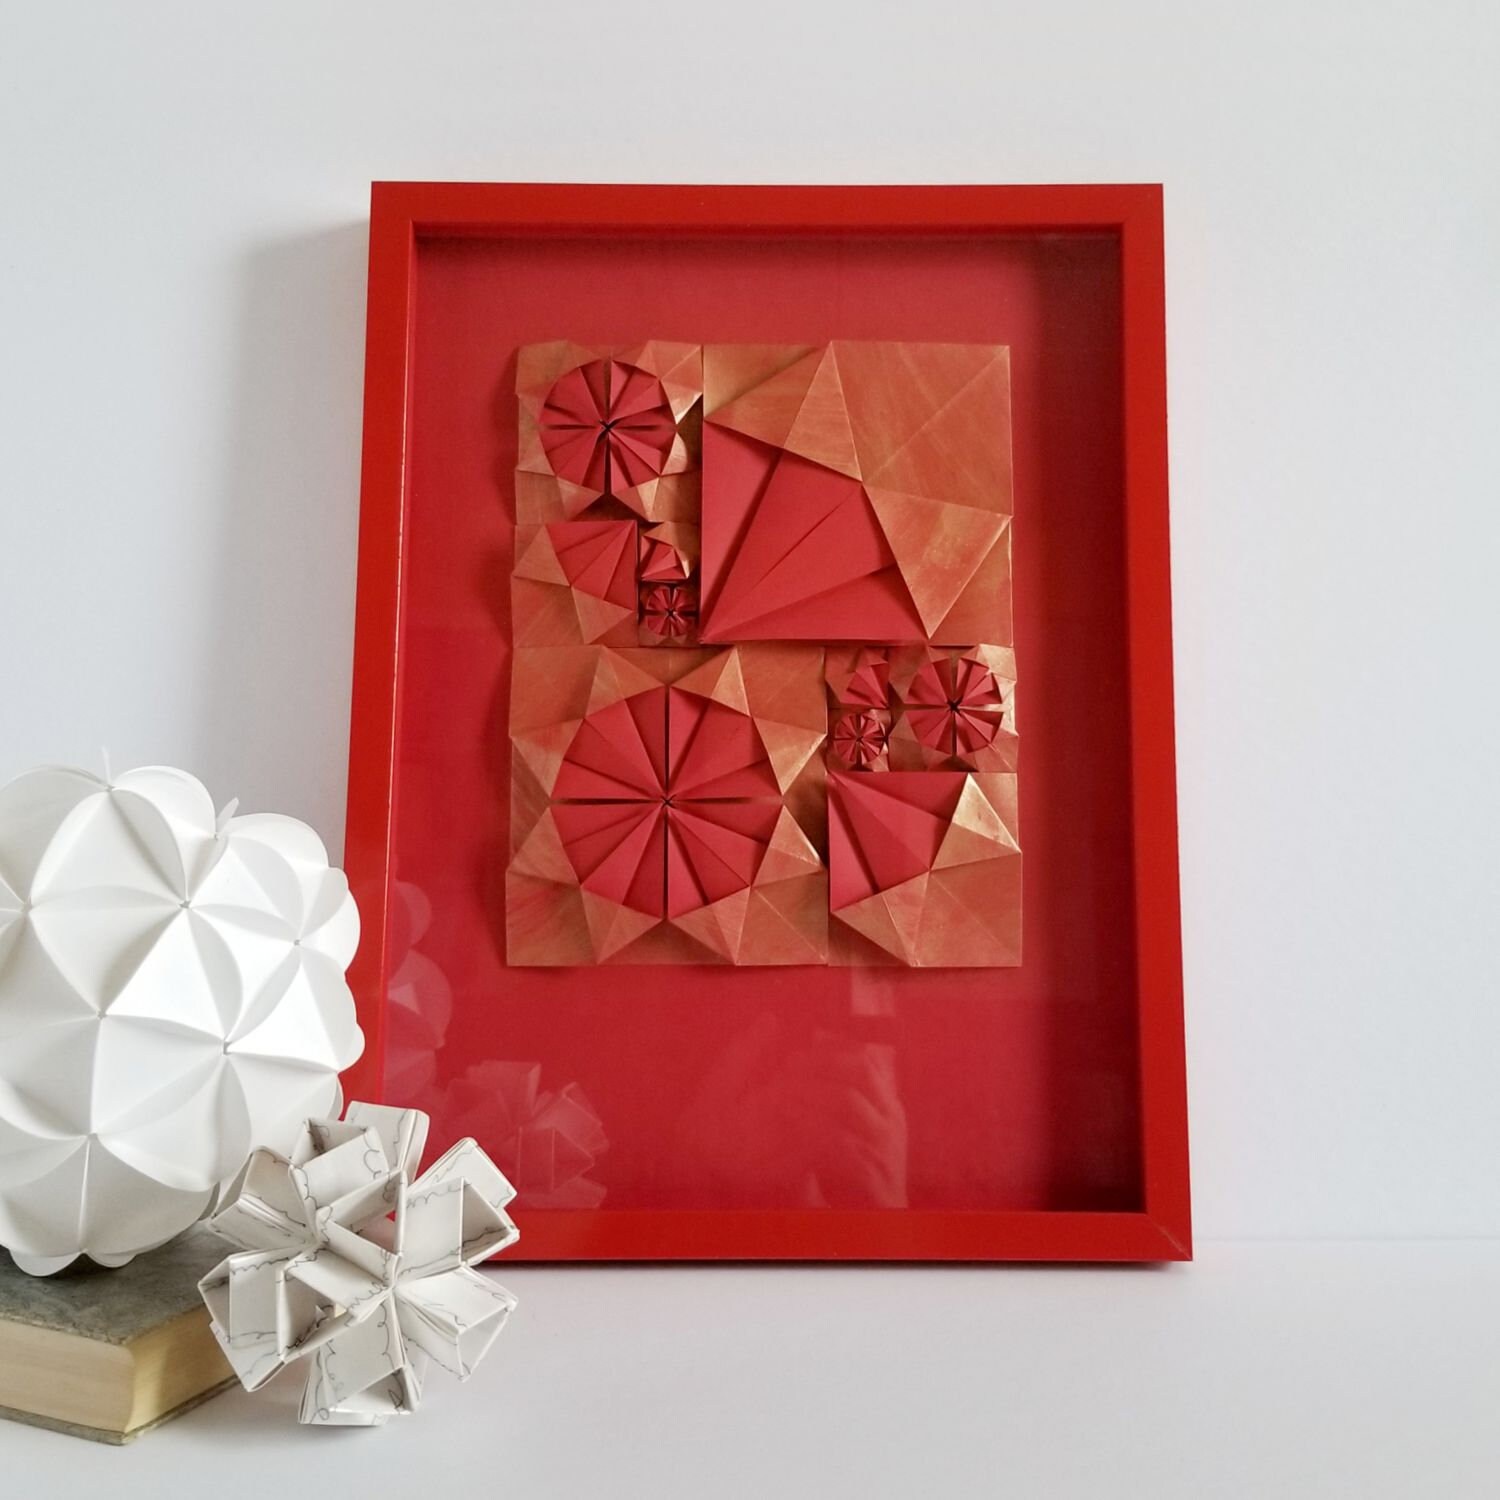 Bag of gifts from the paper - OrigamiArt.Us